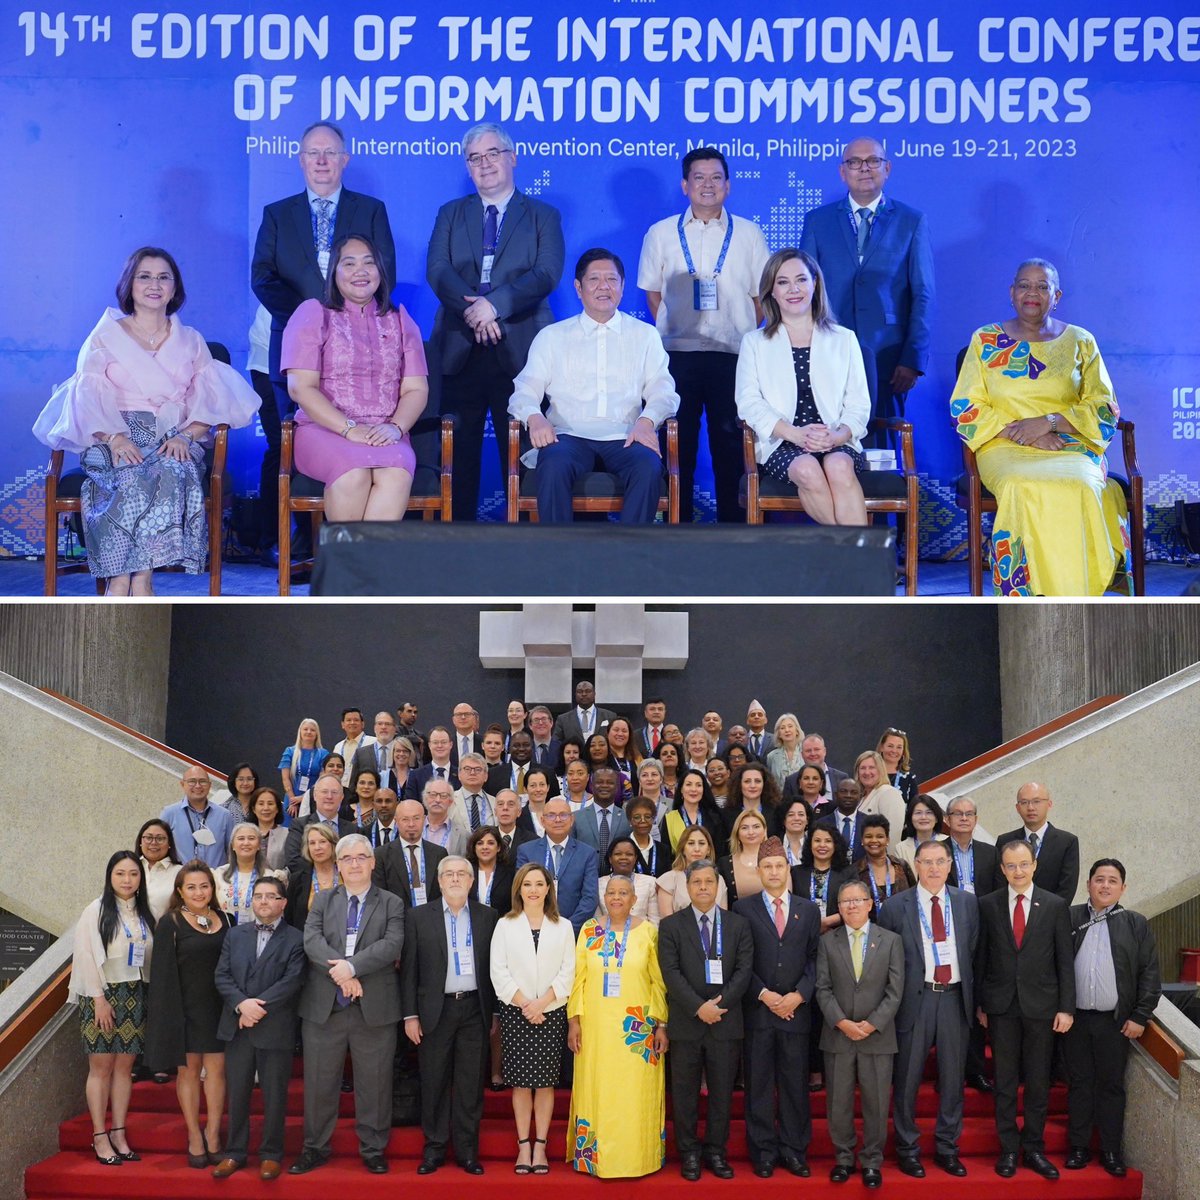 How could a country with no FOI Law and no information commissioner, attain membership in an 80+ member org, and host an int’l conf with the Ph Pres, all within 5 years?

Through perseverance, charm, a little bit of luck, and a whole lot of crazy. 😁

Congrats @foi_ph!

#ICIC2023